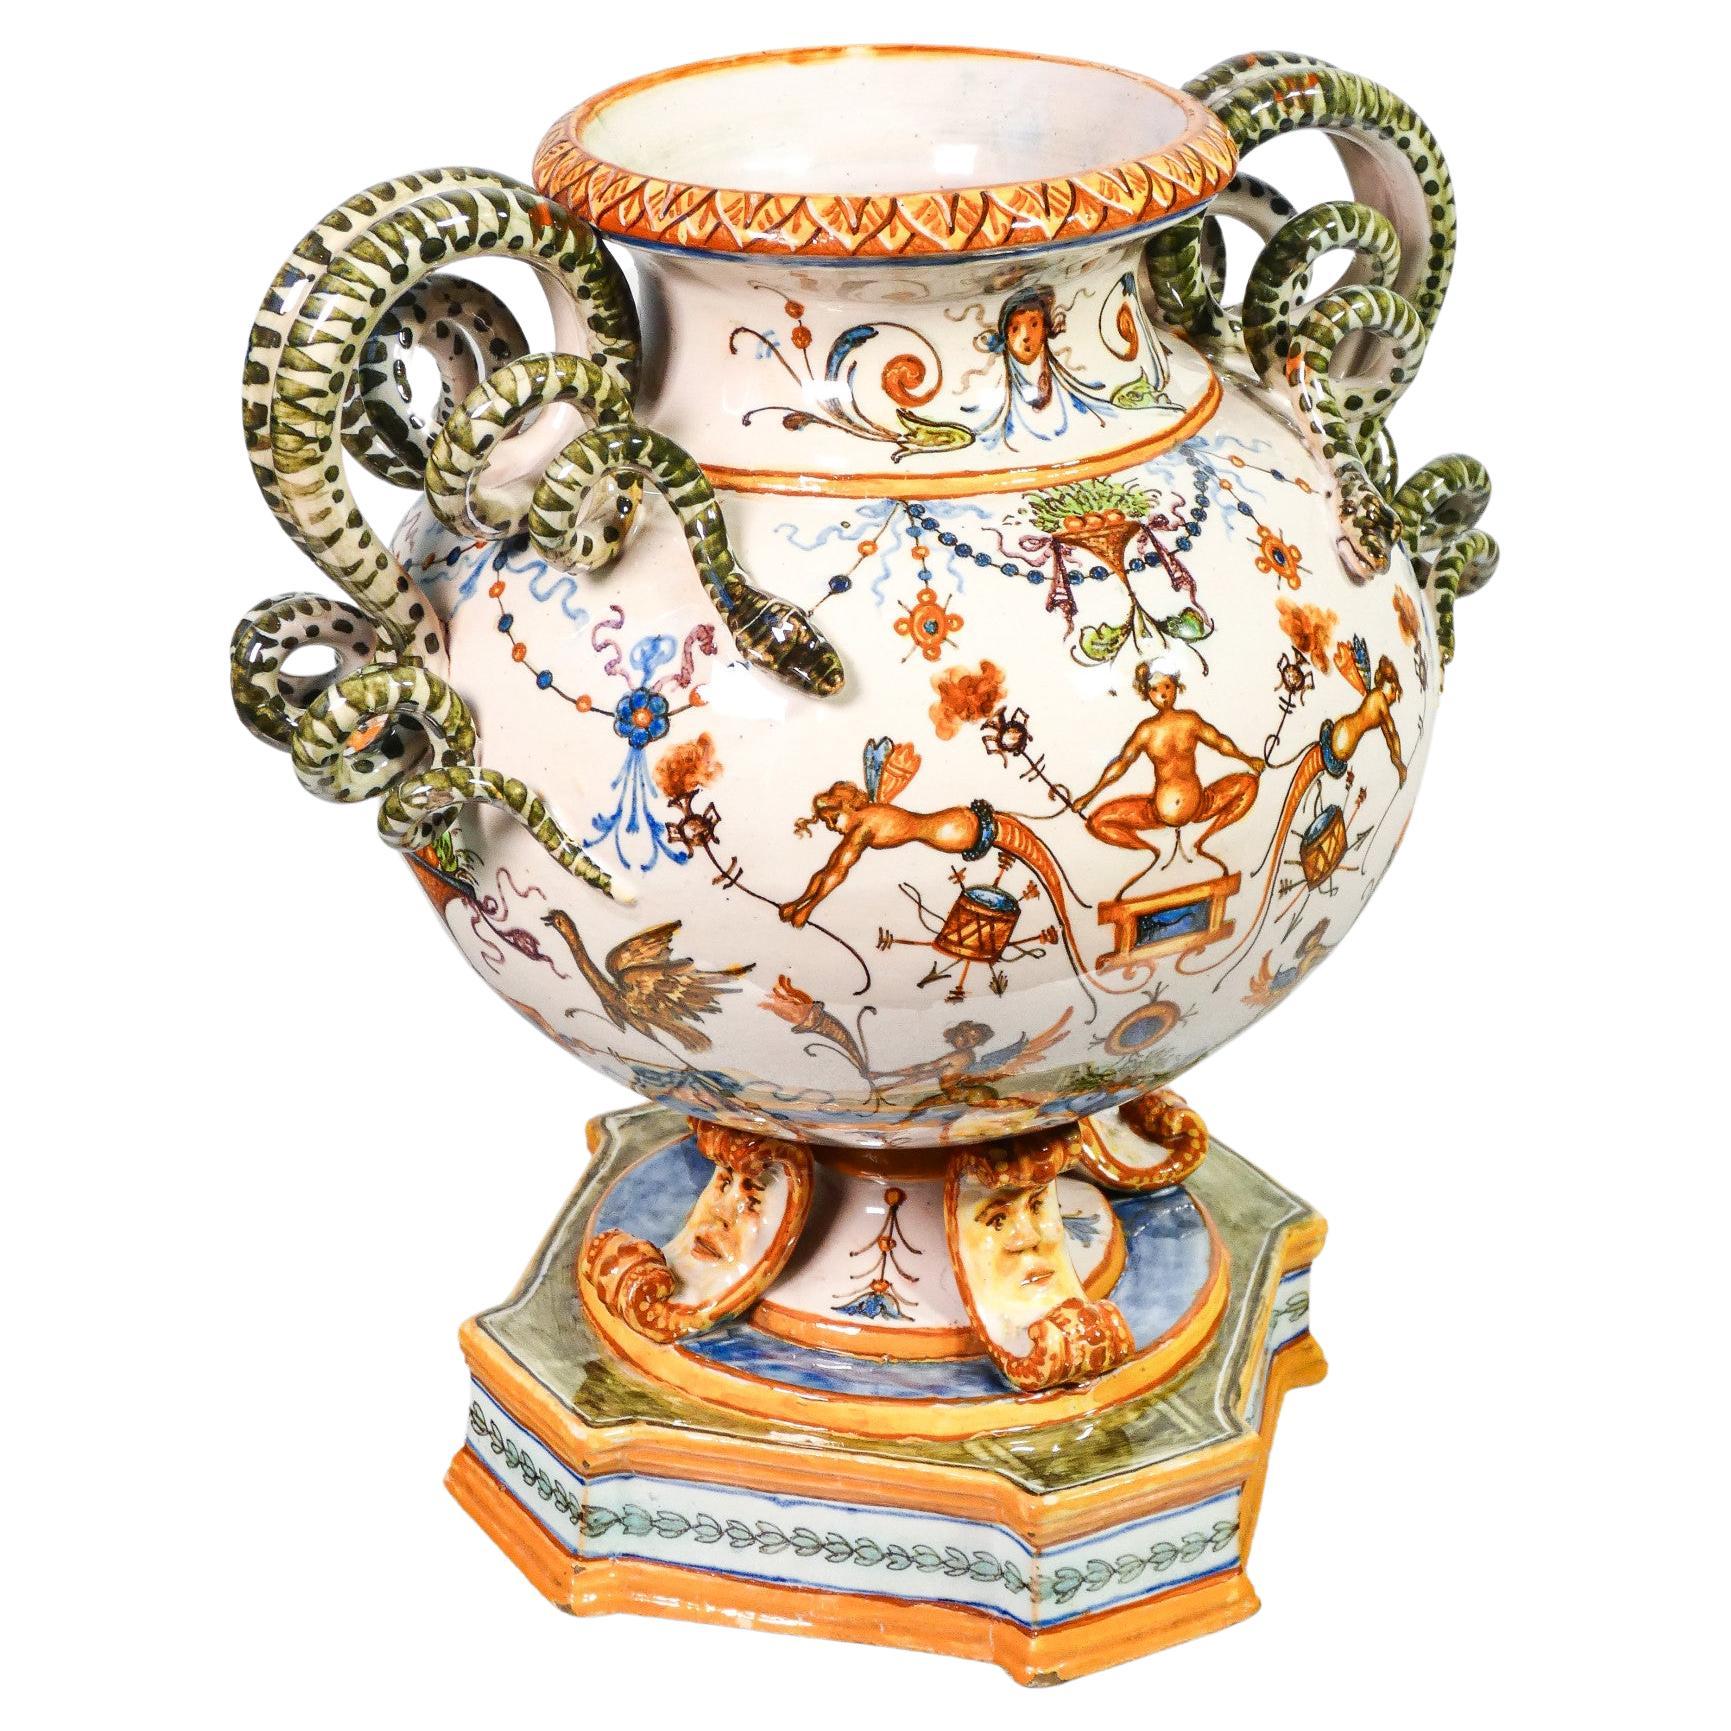 Molaroni Hand Painted Ceramic Vase, Rich Grotesques and Snake Handles, 1920s